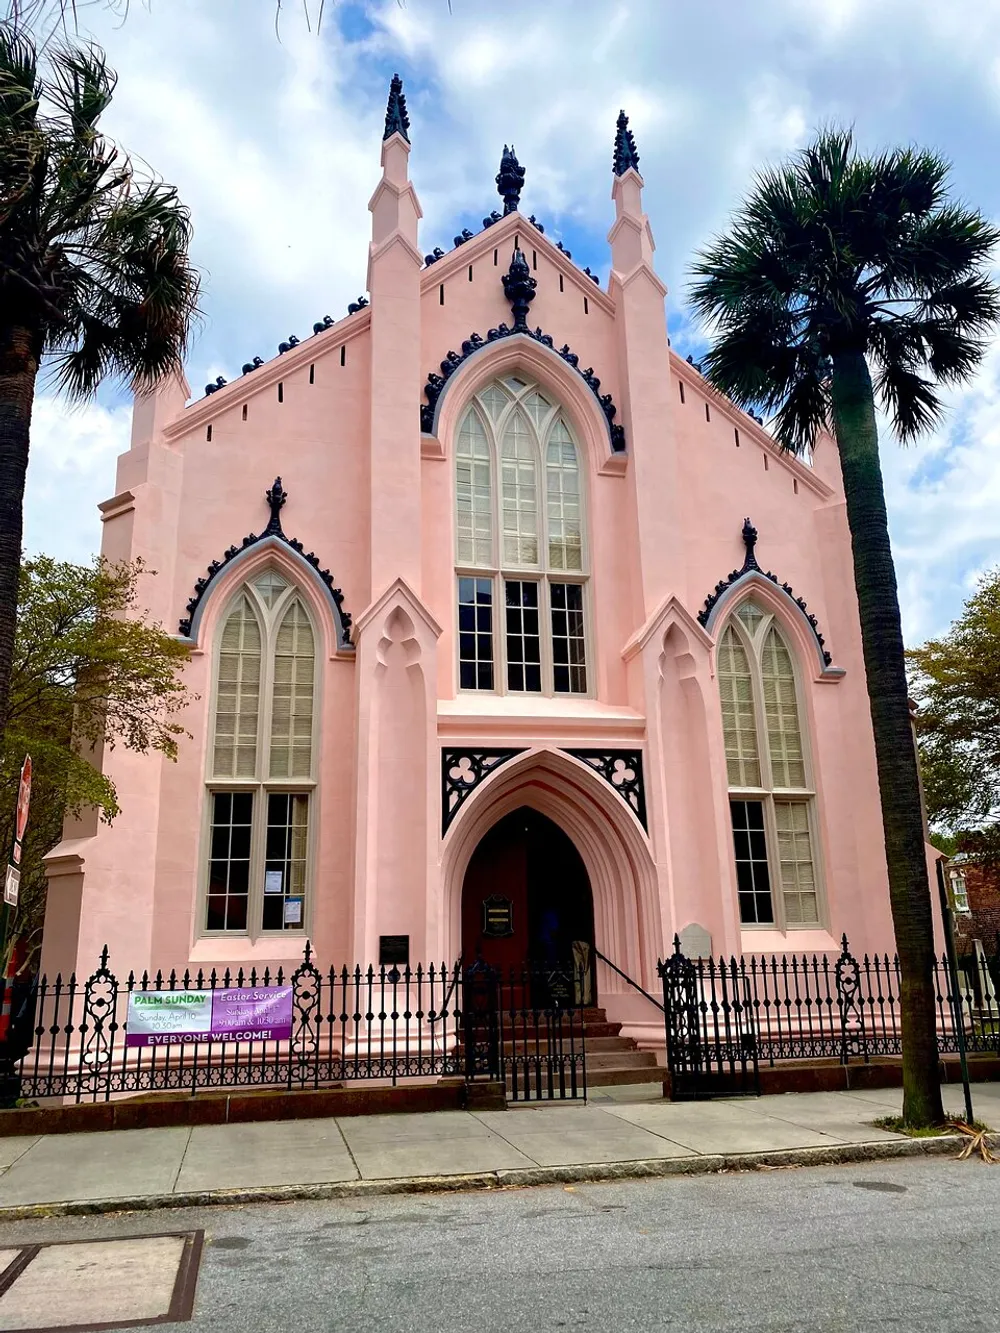 A pastel pink Gothic Revival style church features pointed arch windows and a welcoming banner by the entrance framed by a palm tree and wrought iron fence under a blue sky with scattered clouds